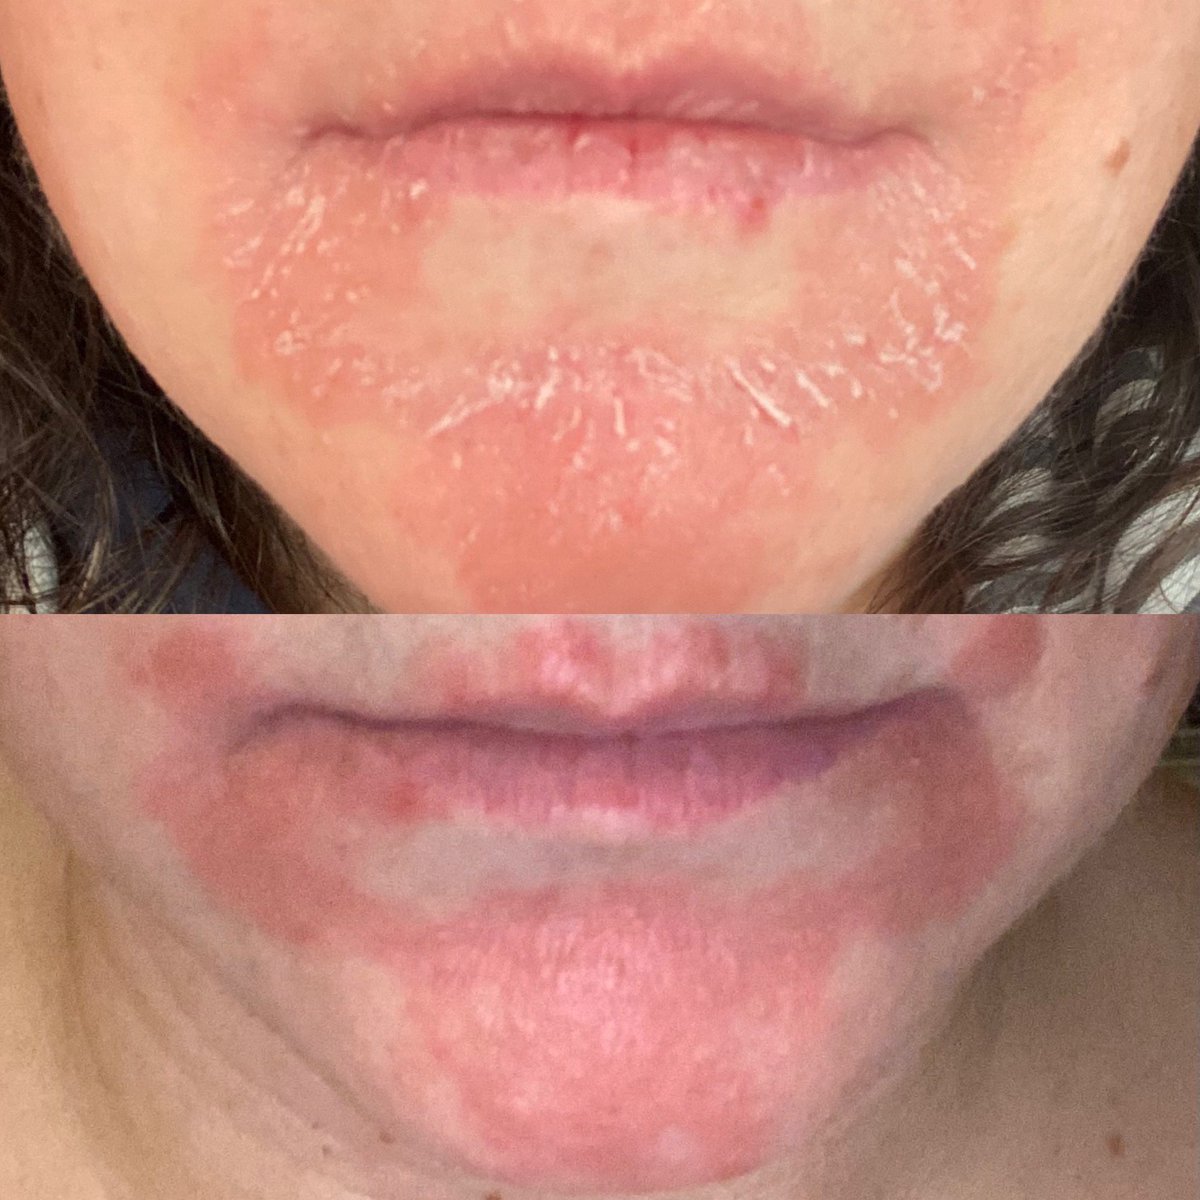 Patient with 1 year history of rash around the mouth. What’s the diagnosis? #TwitterConsult #WithConsent